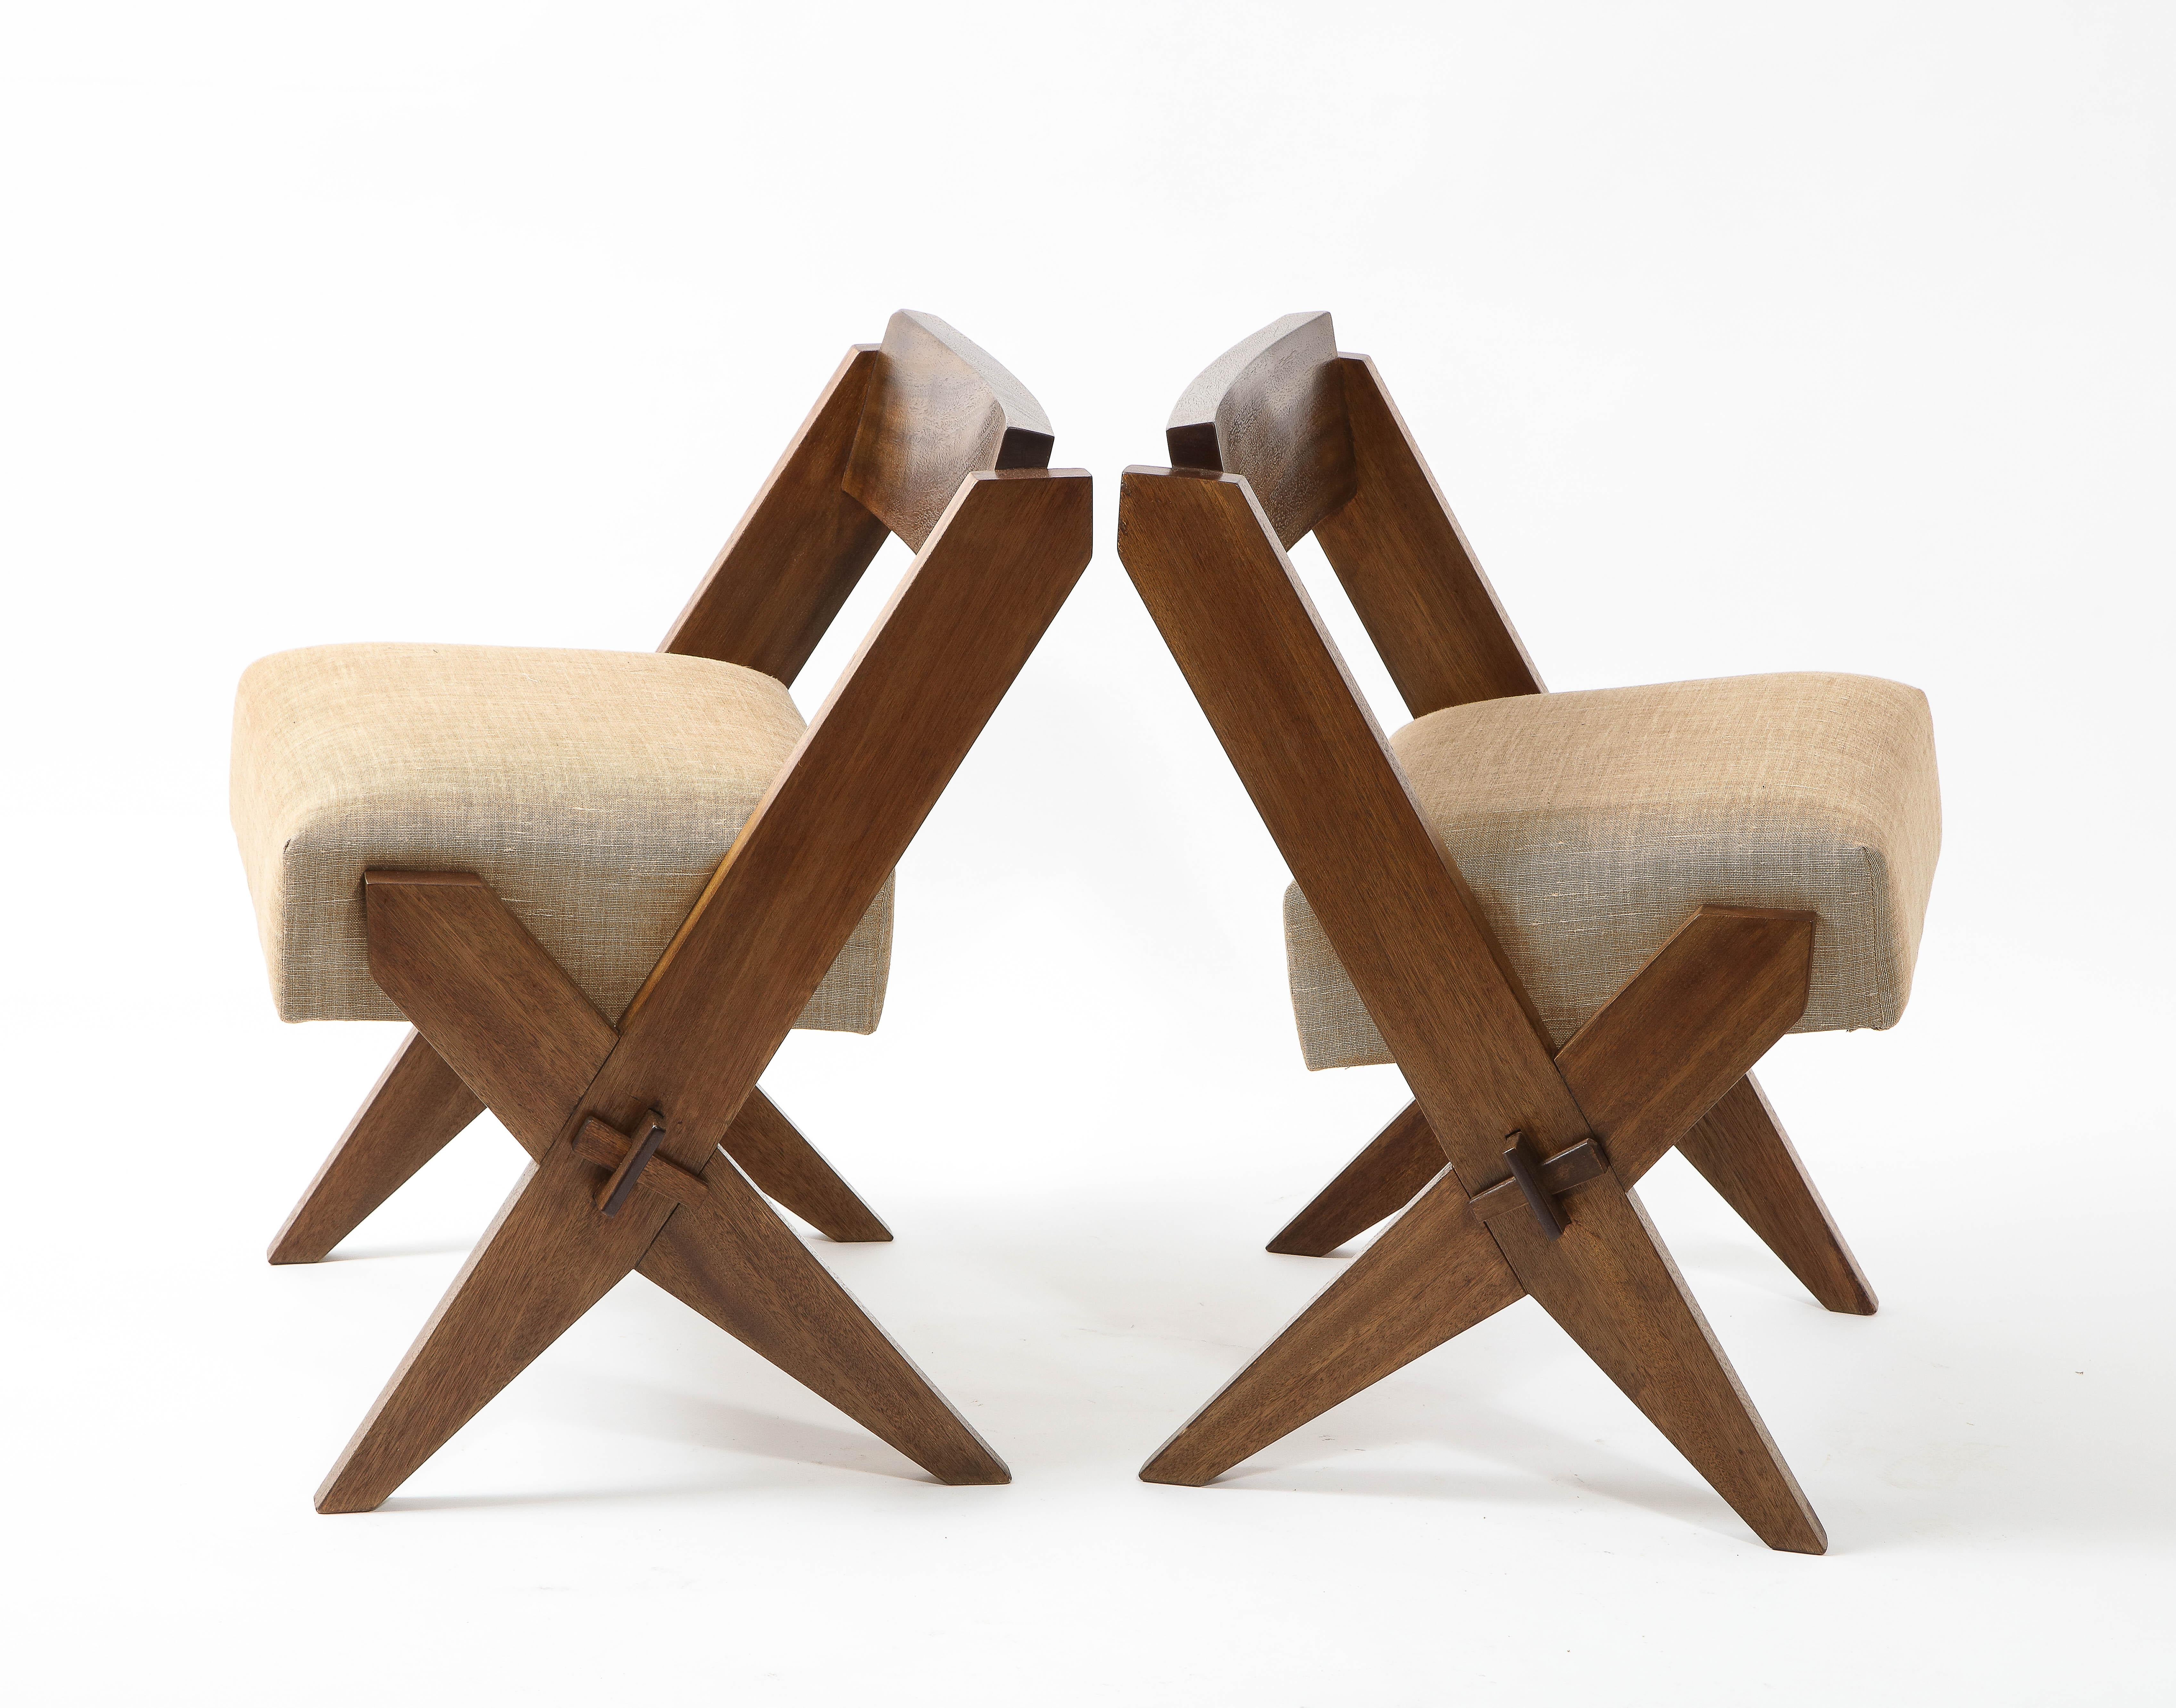 French Pair of Reconstruction Small Solid Wood Scissor Leg Chairs, France 1950's For Sale